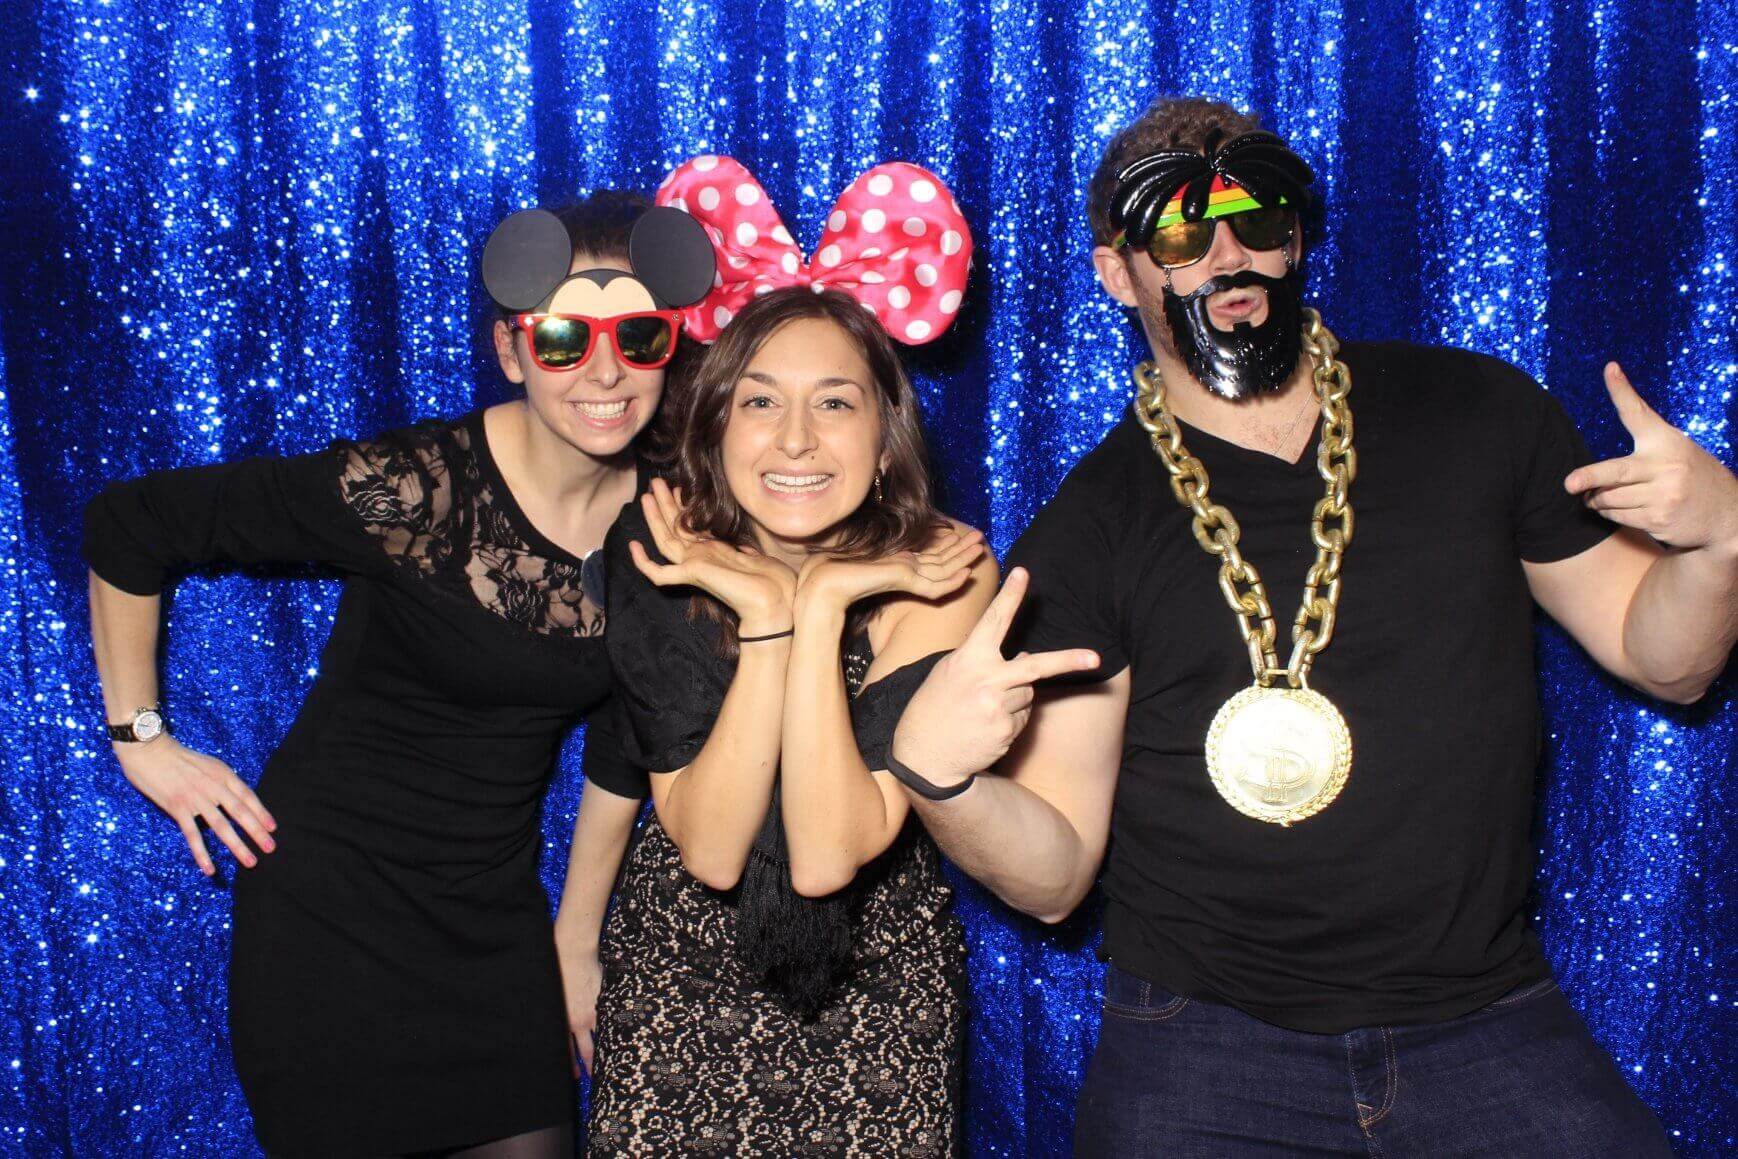 Photo booth rental in Toronto for an event. Posing in front of a blue sequin glitter backdrop offered by LOL Photo Booth. Tags: Event planning ideas, Photo booth prints, high resolution photos, Toronto photo booth rental services. GIFS, Boomerangs, Mosaic Walls, Slow motion, brand activation.